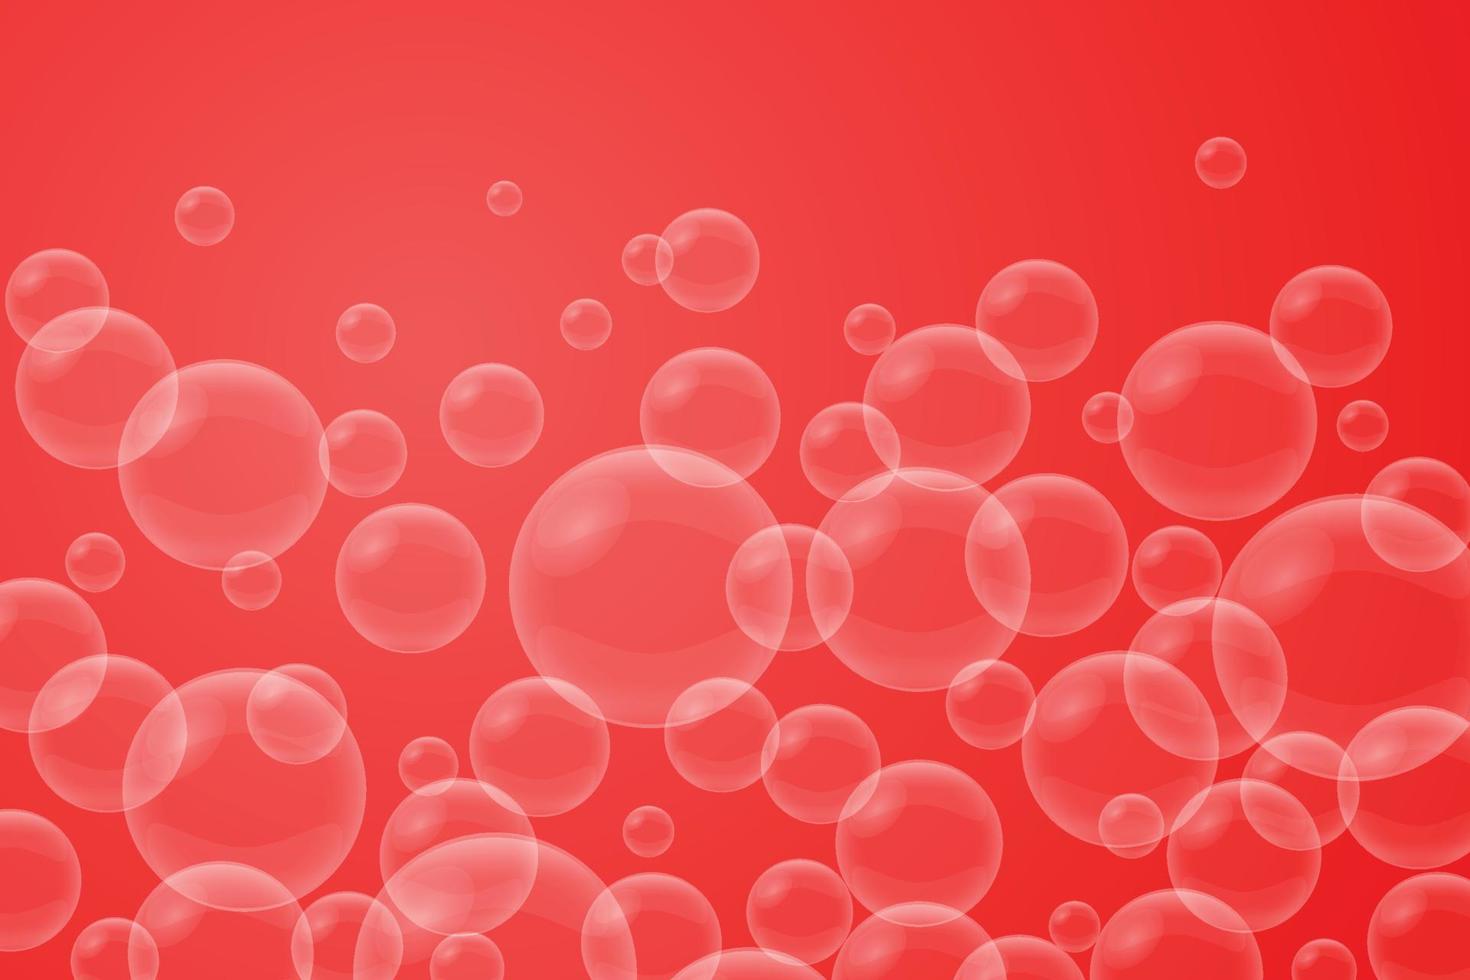 Abstract bubbles on a red background vector